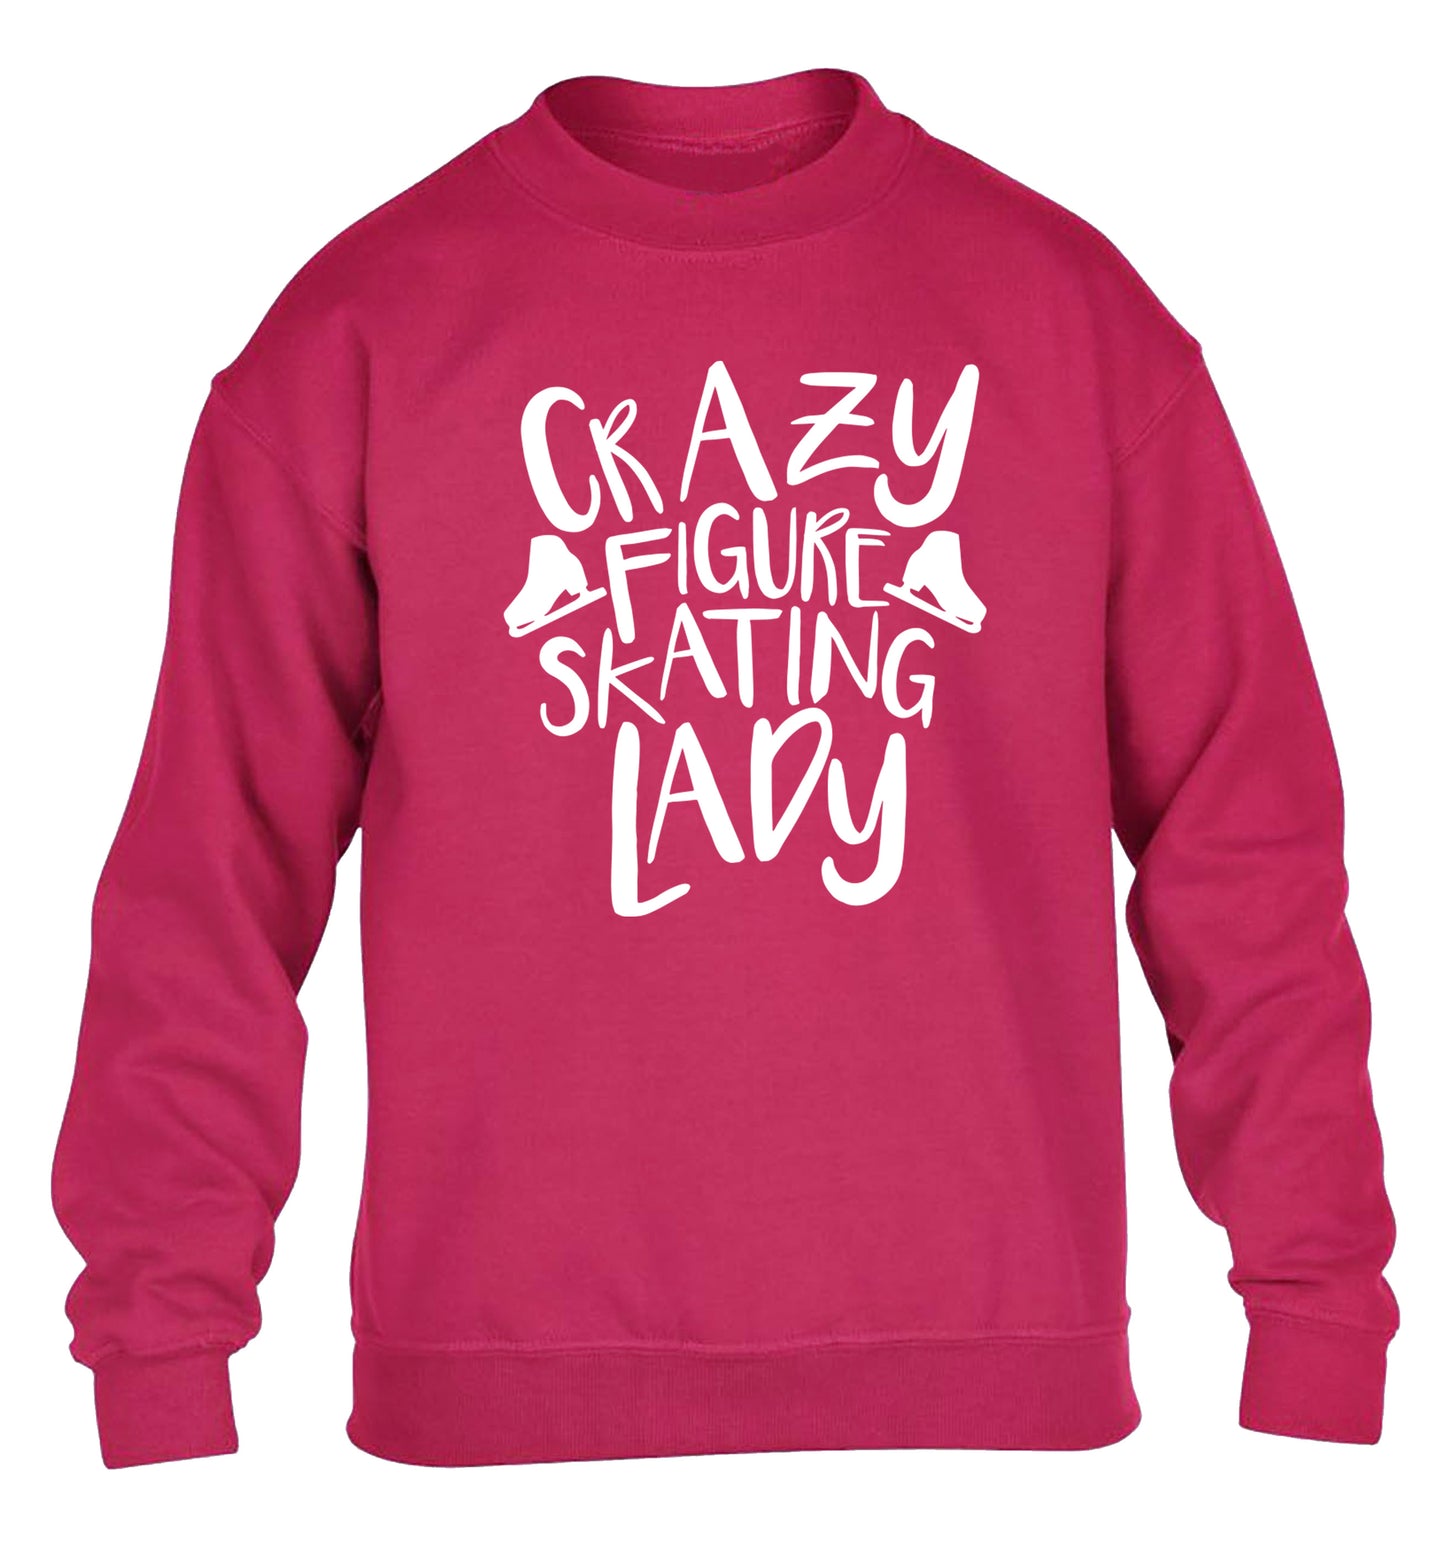 Crazy figure skating lady children's pink sweater 12-14 Years